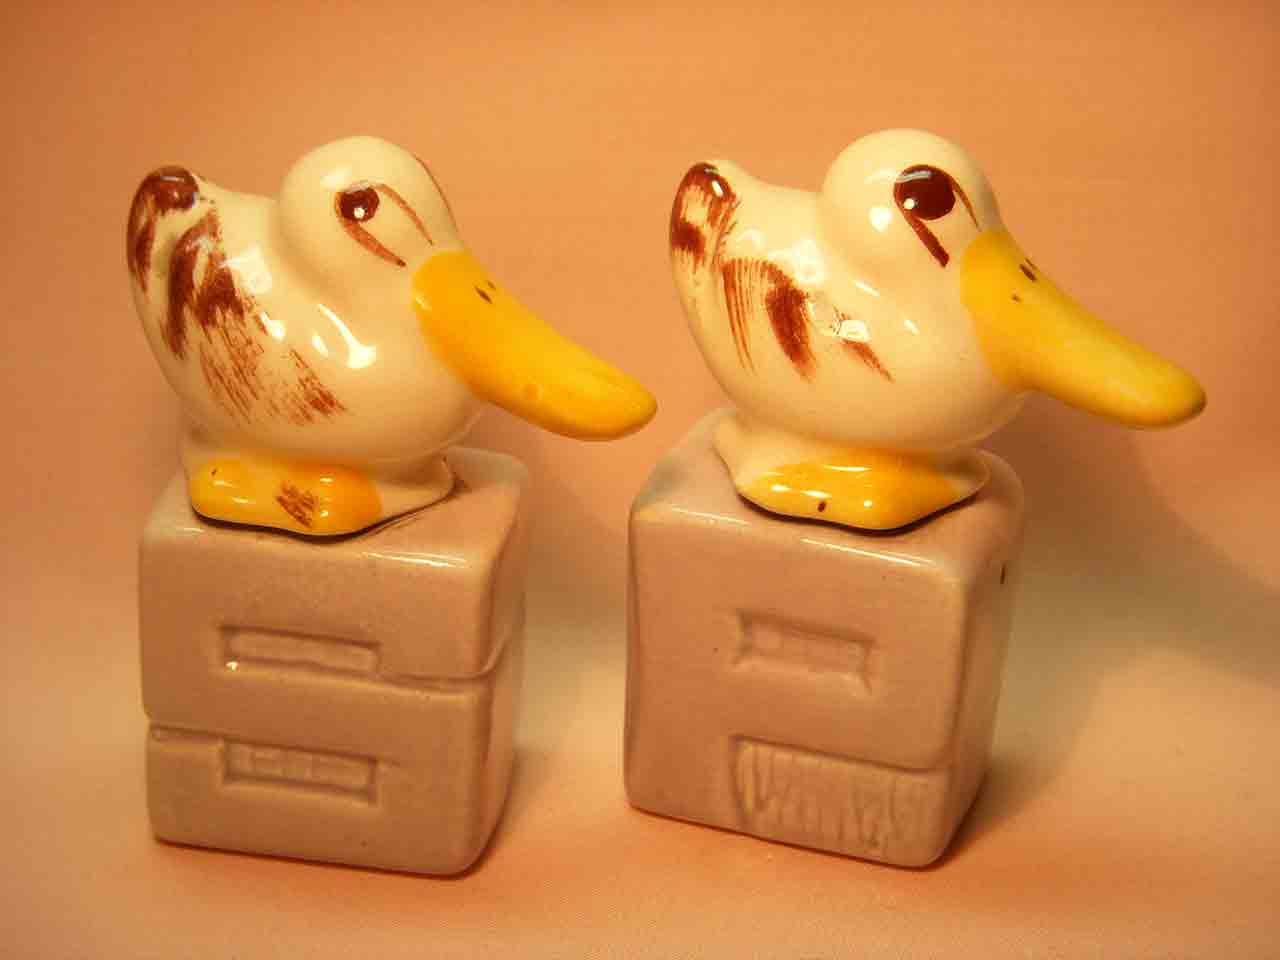 Animals on S&P letters salt and pepper shakers - Ducks